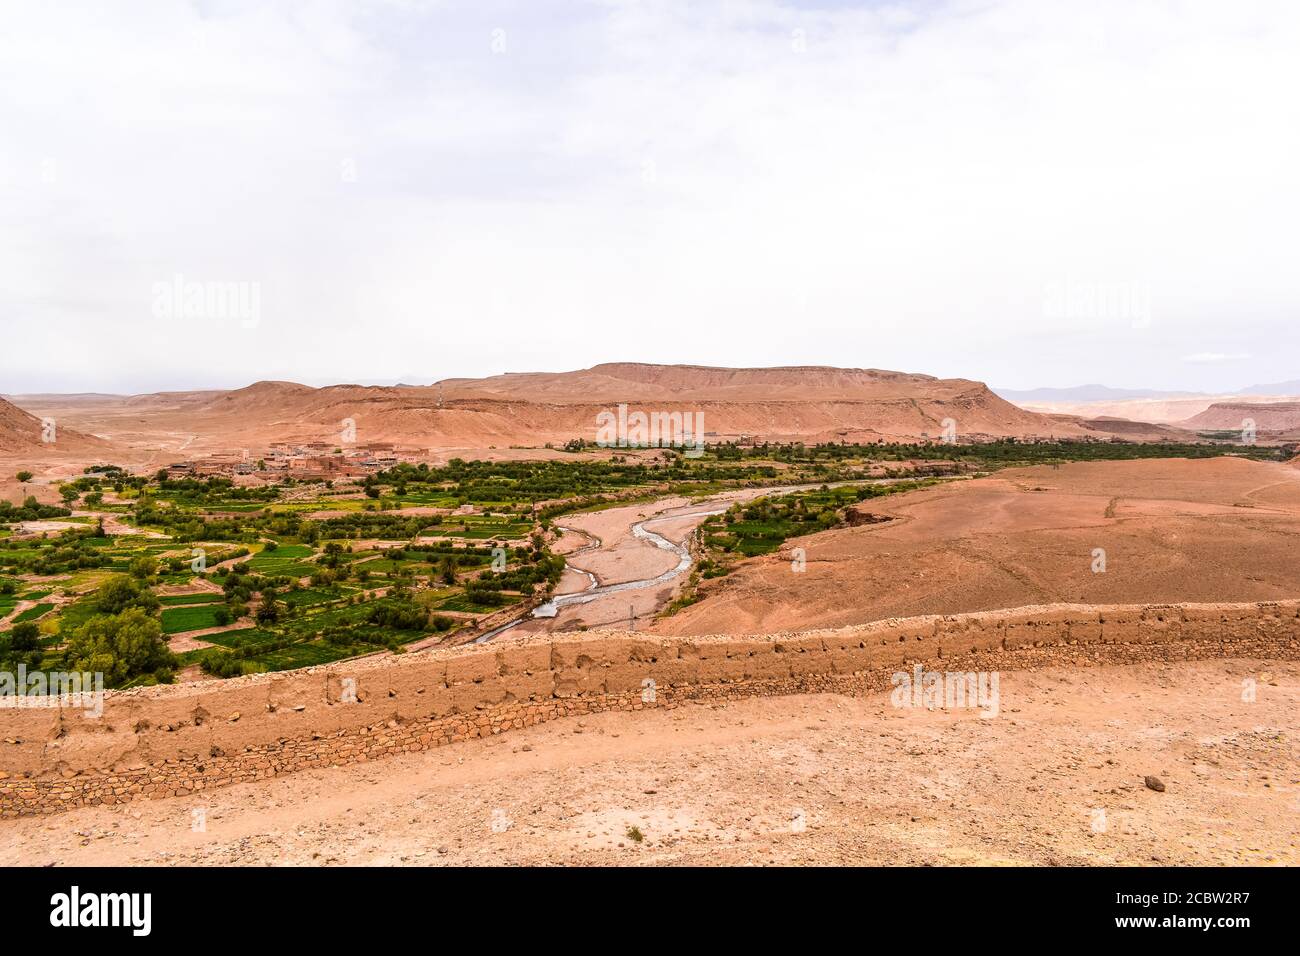 The view of the Ounila River from Ait Benhaddou Stock Photo